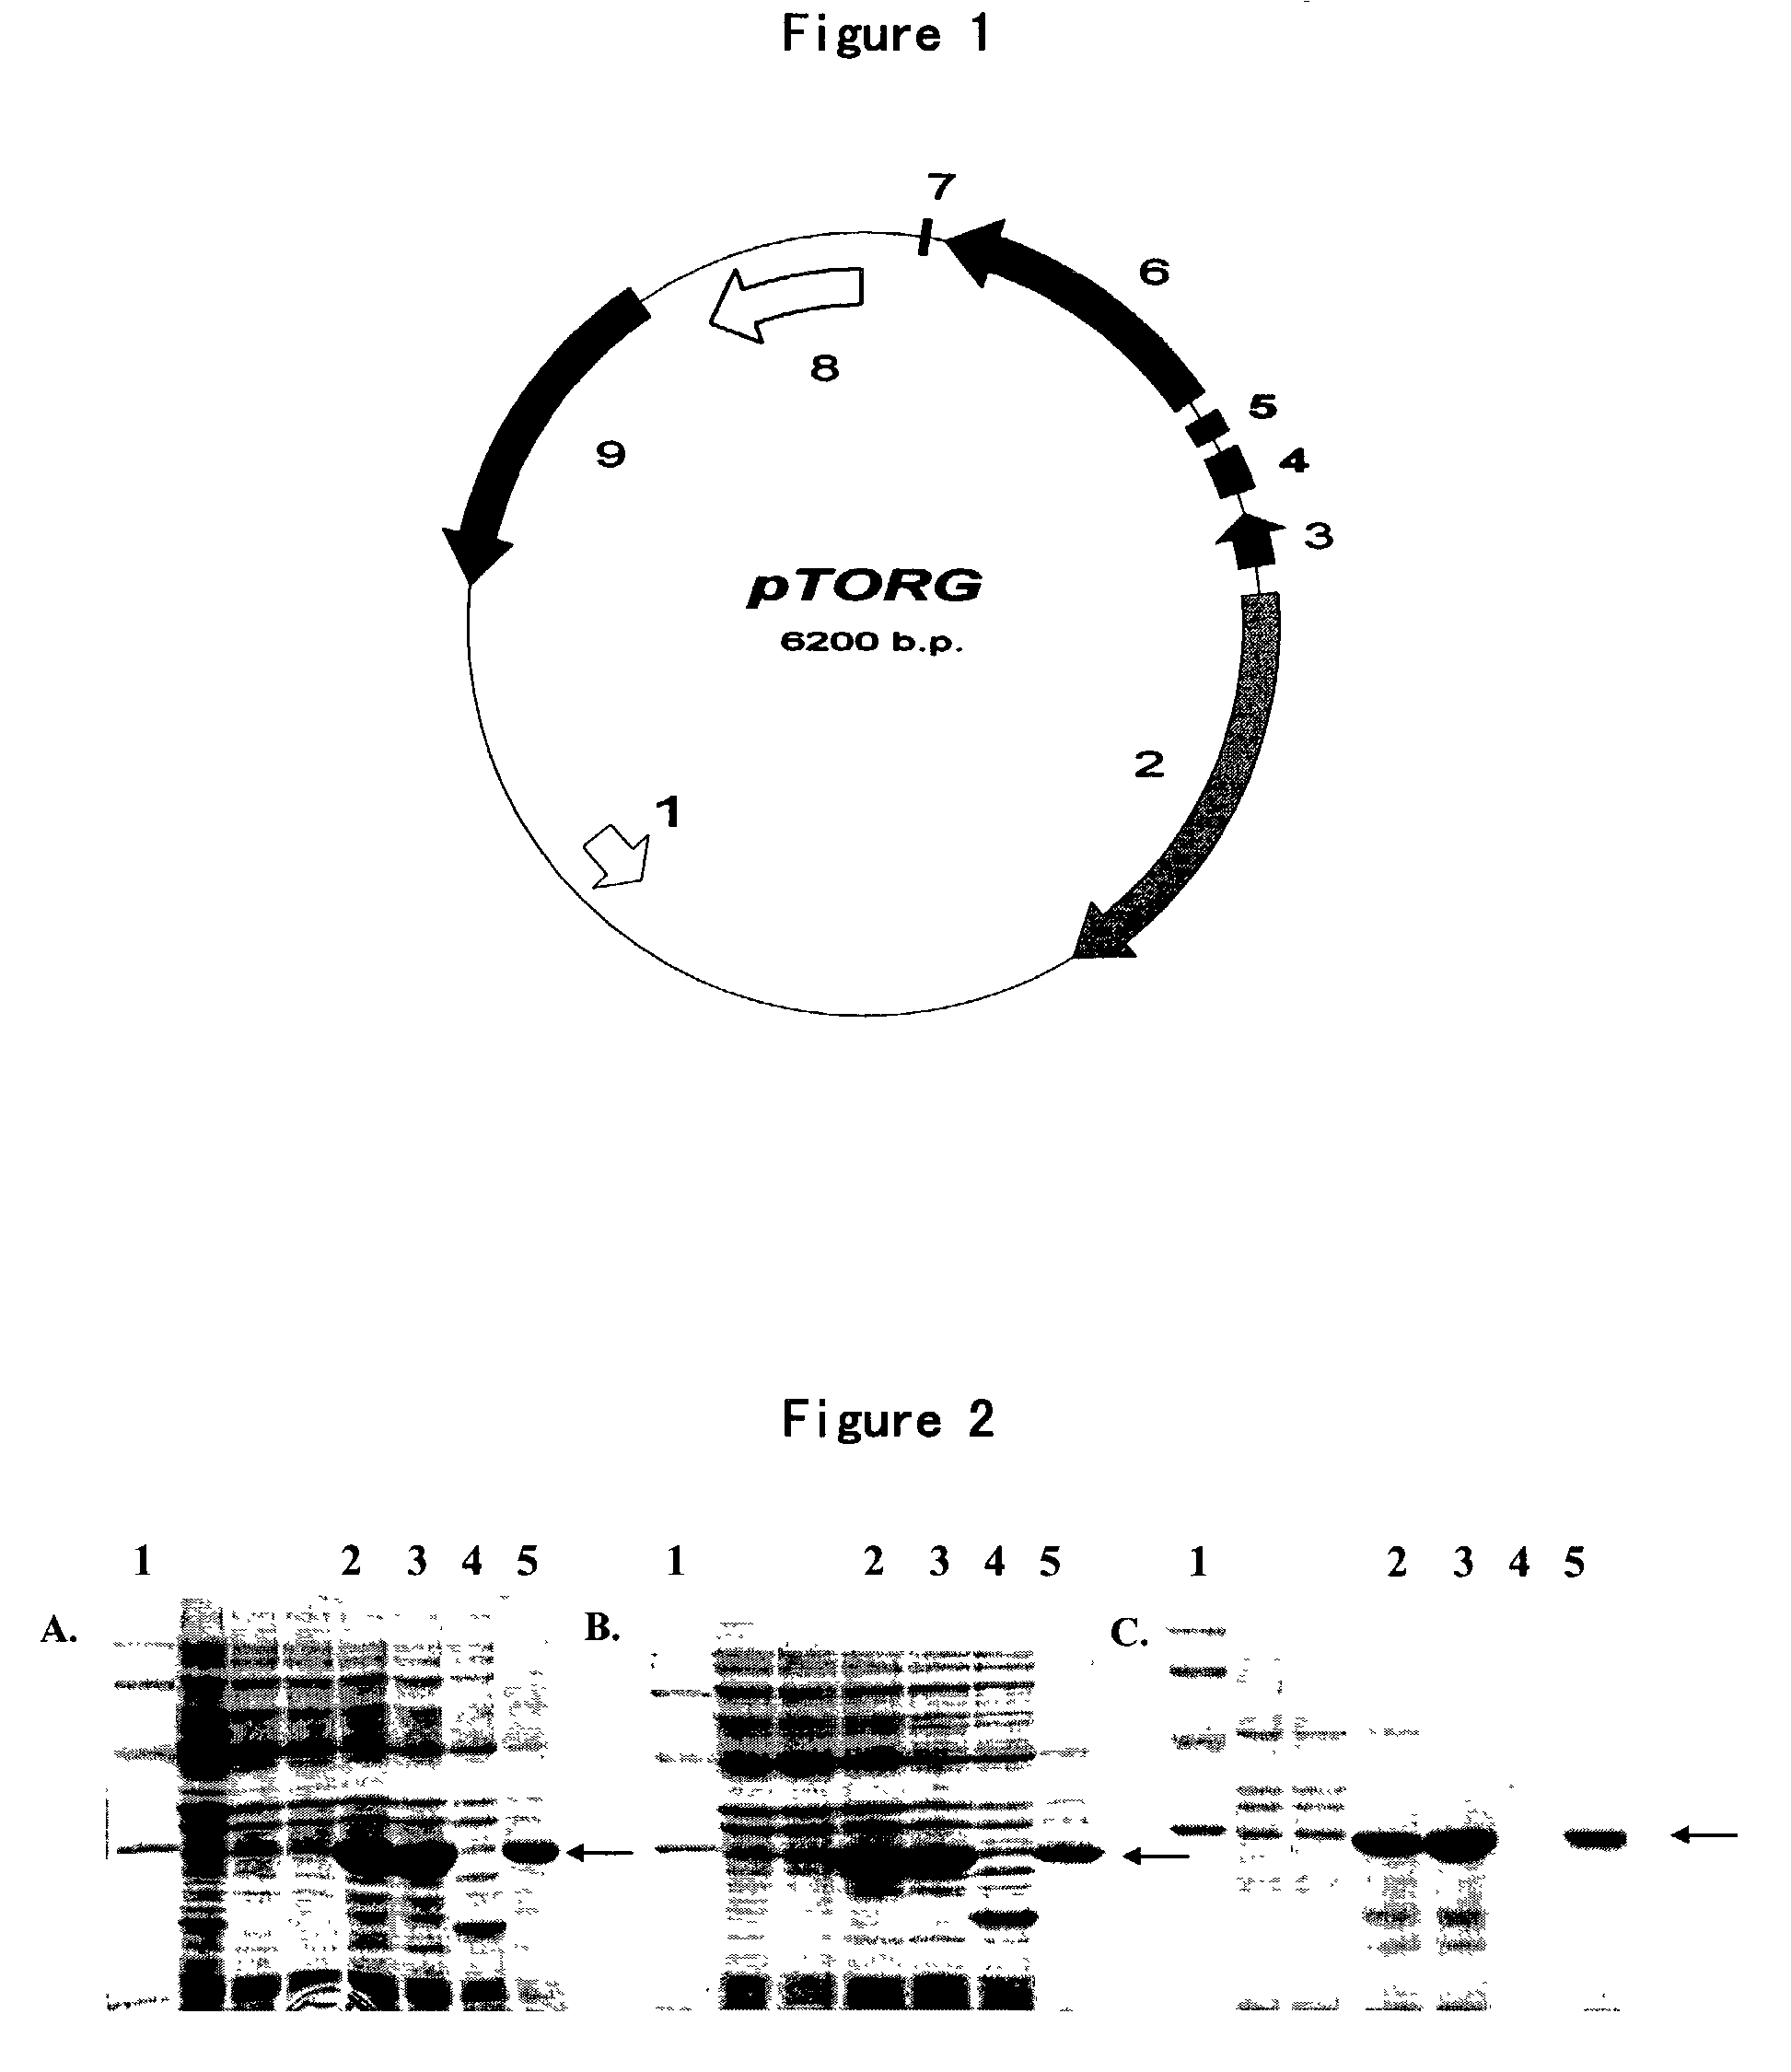 Method for enhancing solubility of recombinant protein products in <i>E. coli </i>